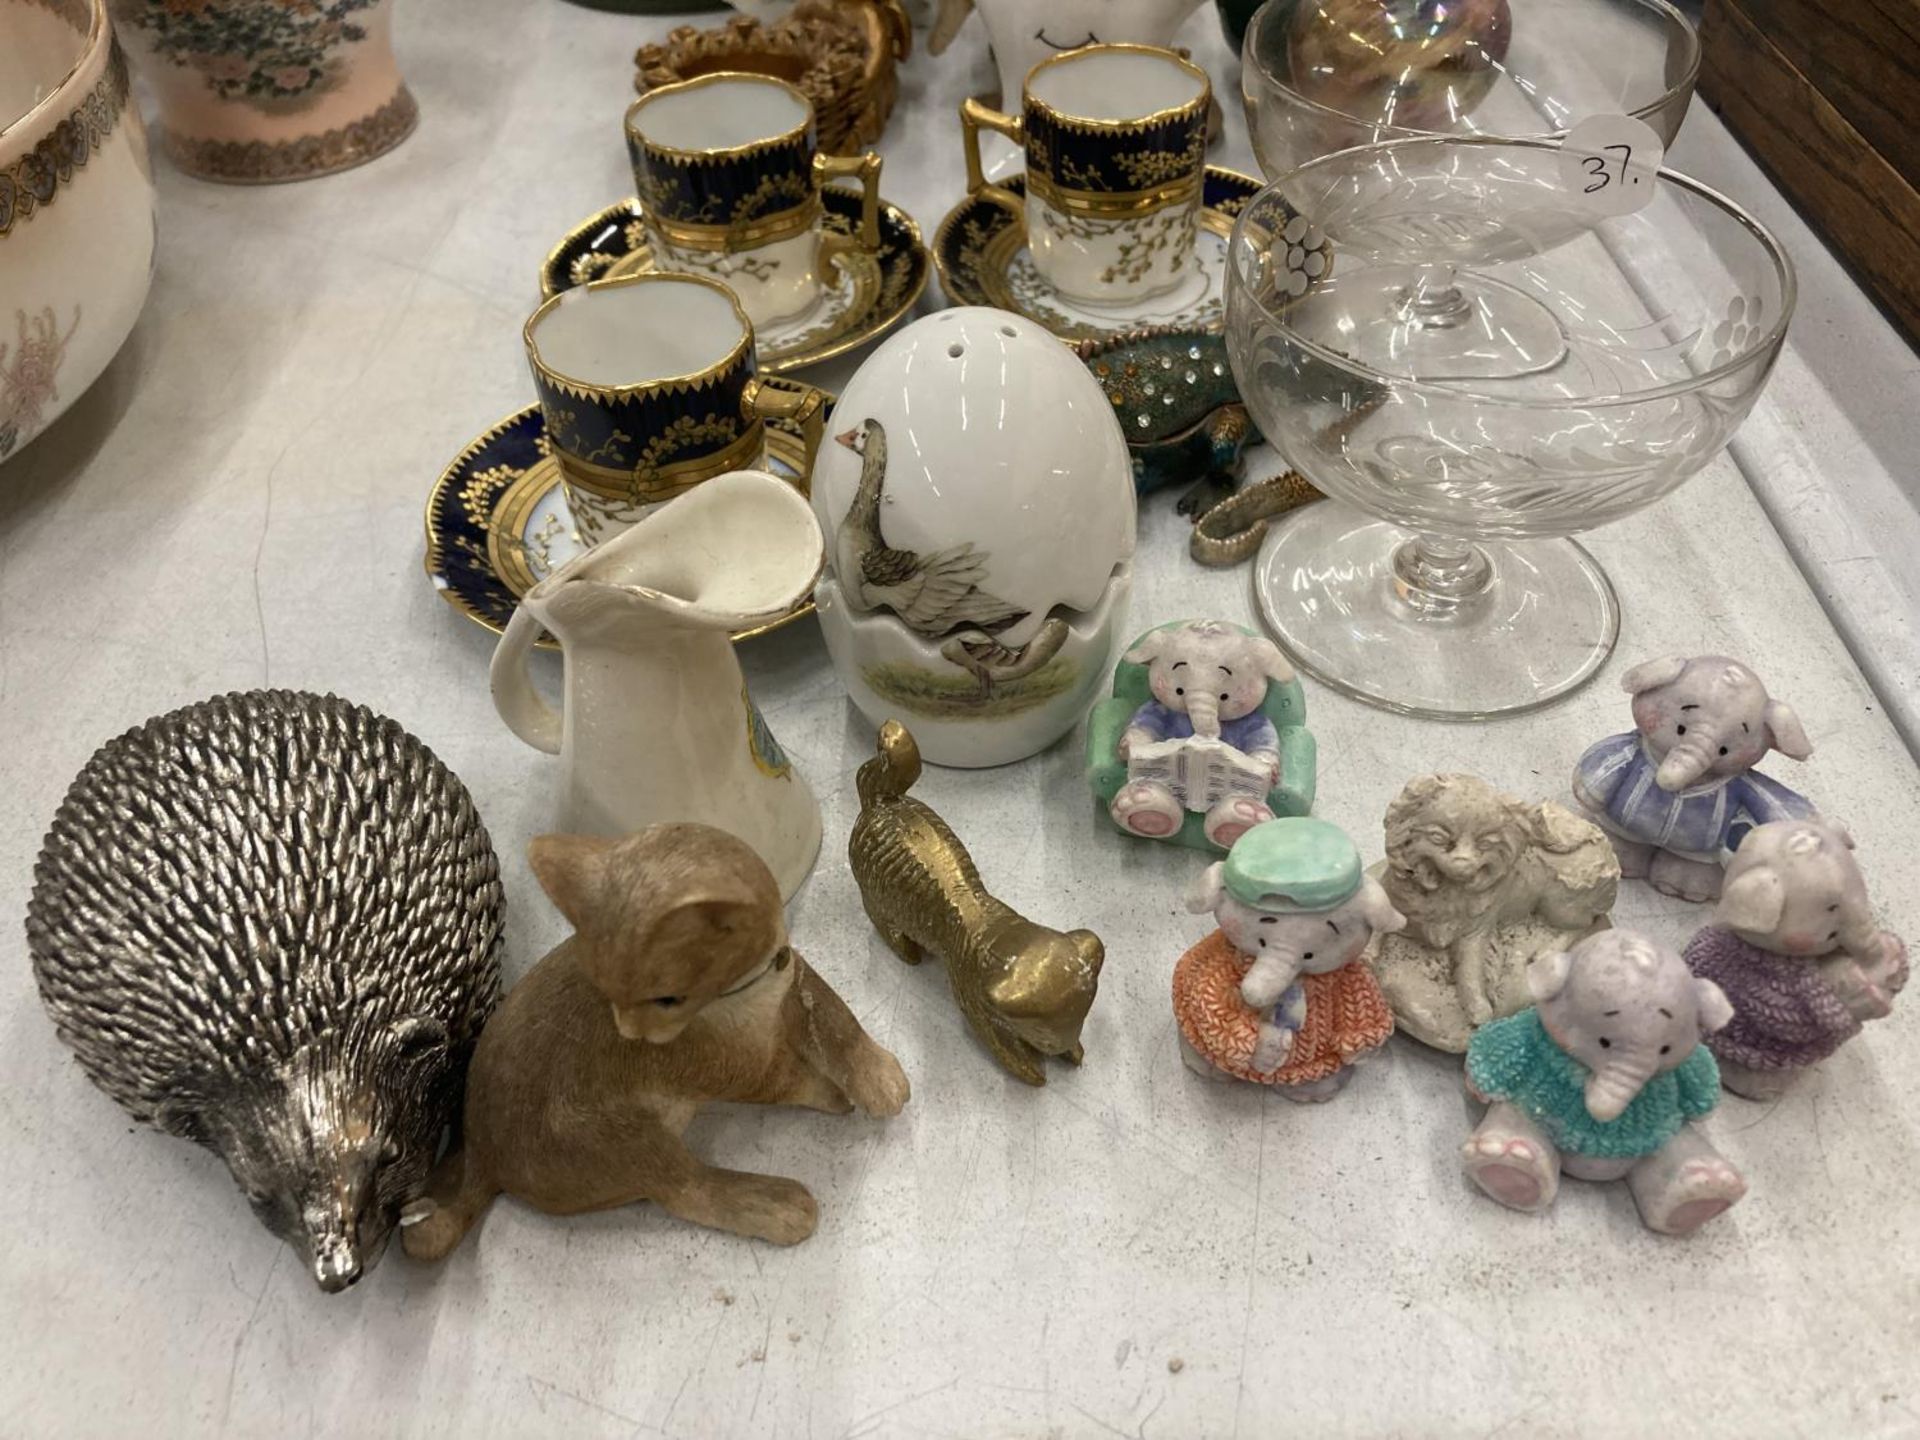 A MIXED LOT TO INCLUDE SMALL CUPS AND SAUCERS, ANIMAL FIGURES, GLASSWARE, A DOULTON MUG, ETC - Image 4 of 4